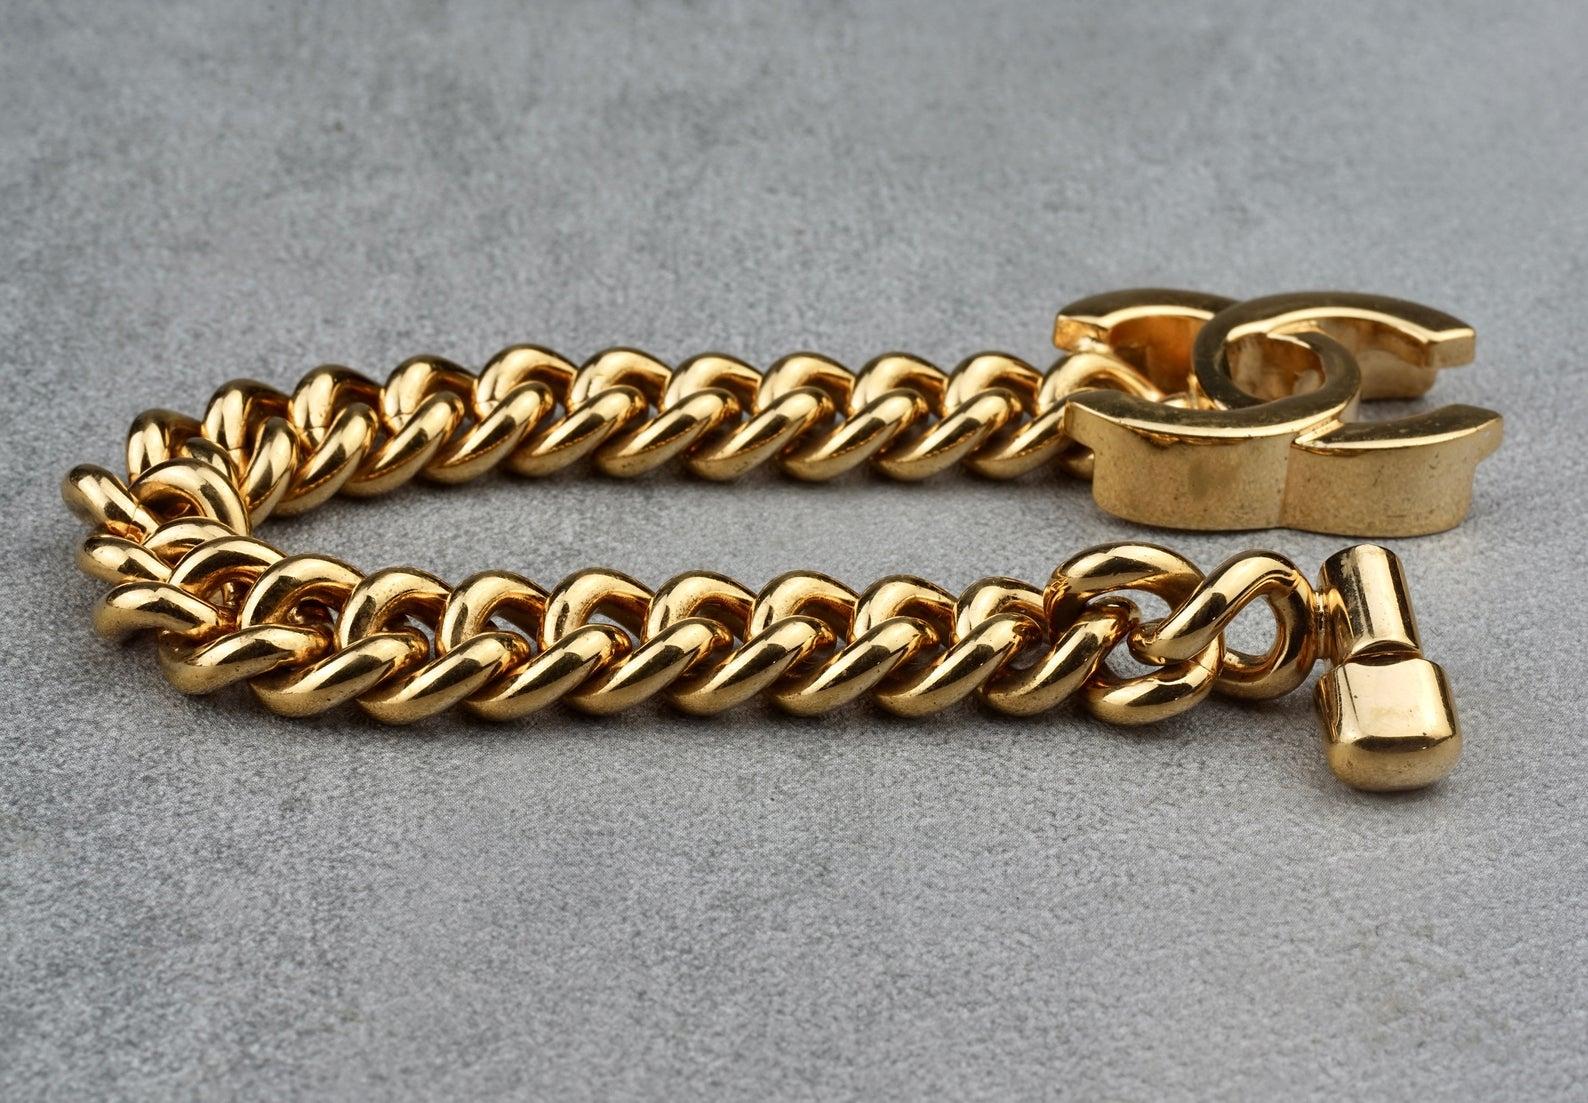 Vintage Iconic CHANEL CC Turnlock Chain Bracelet

Measurements:
Height: 0.98 inch (2.5 cm)
Wearable Length: 7.28 inches (18.5 cm)

Features:
- 100% Authentic CHANEL.
- Chain bracelet with CC turnlock.
- Turnlock CC closure.
- Signed CHANEL 95 CC A